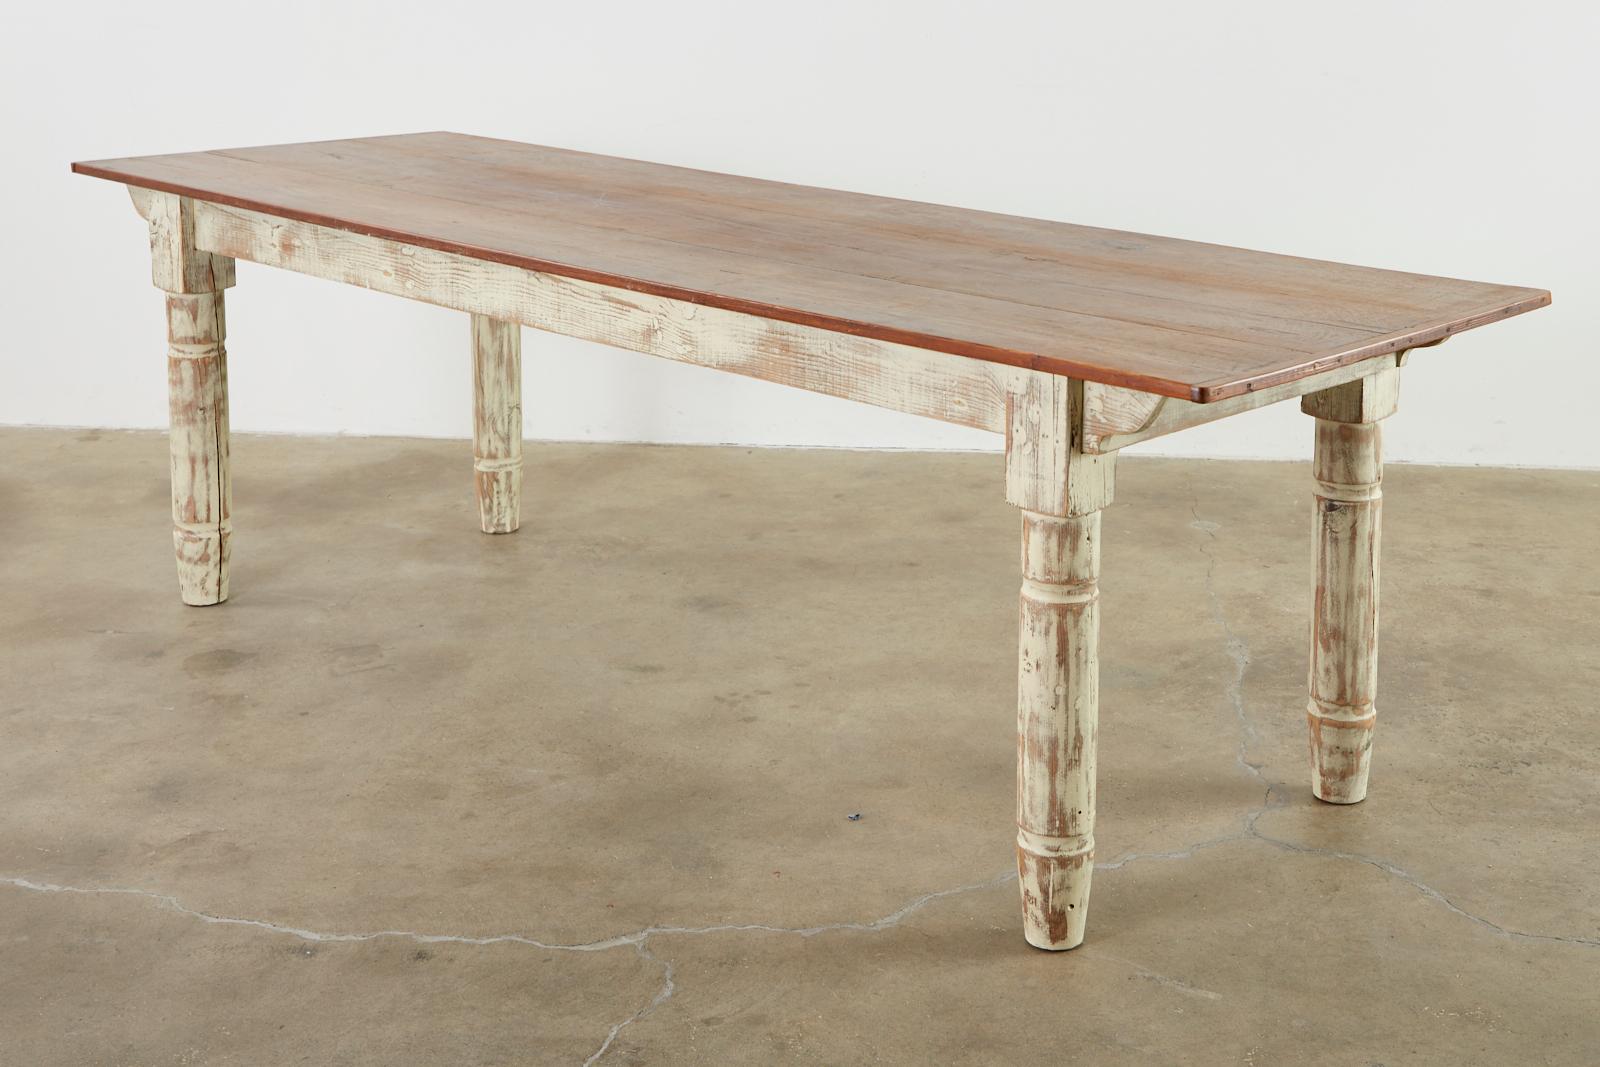 20th Century American Country Painted Pine Farmhouse Dining Table For Sale